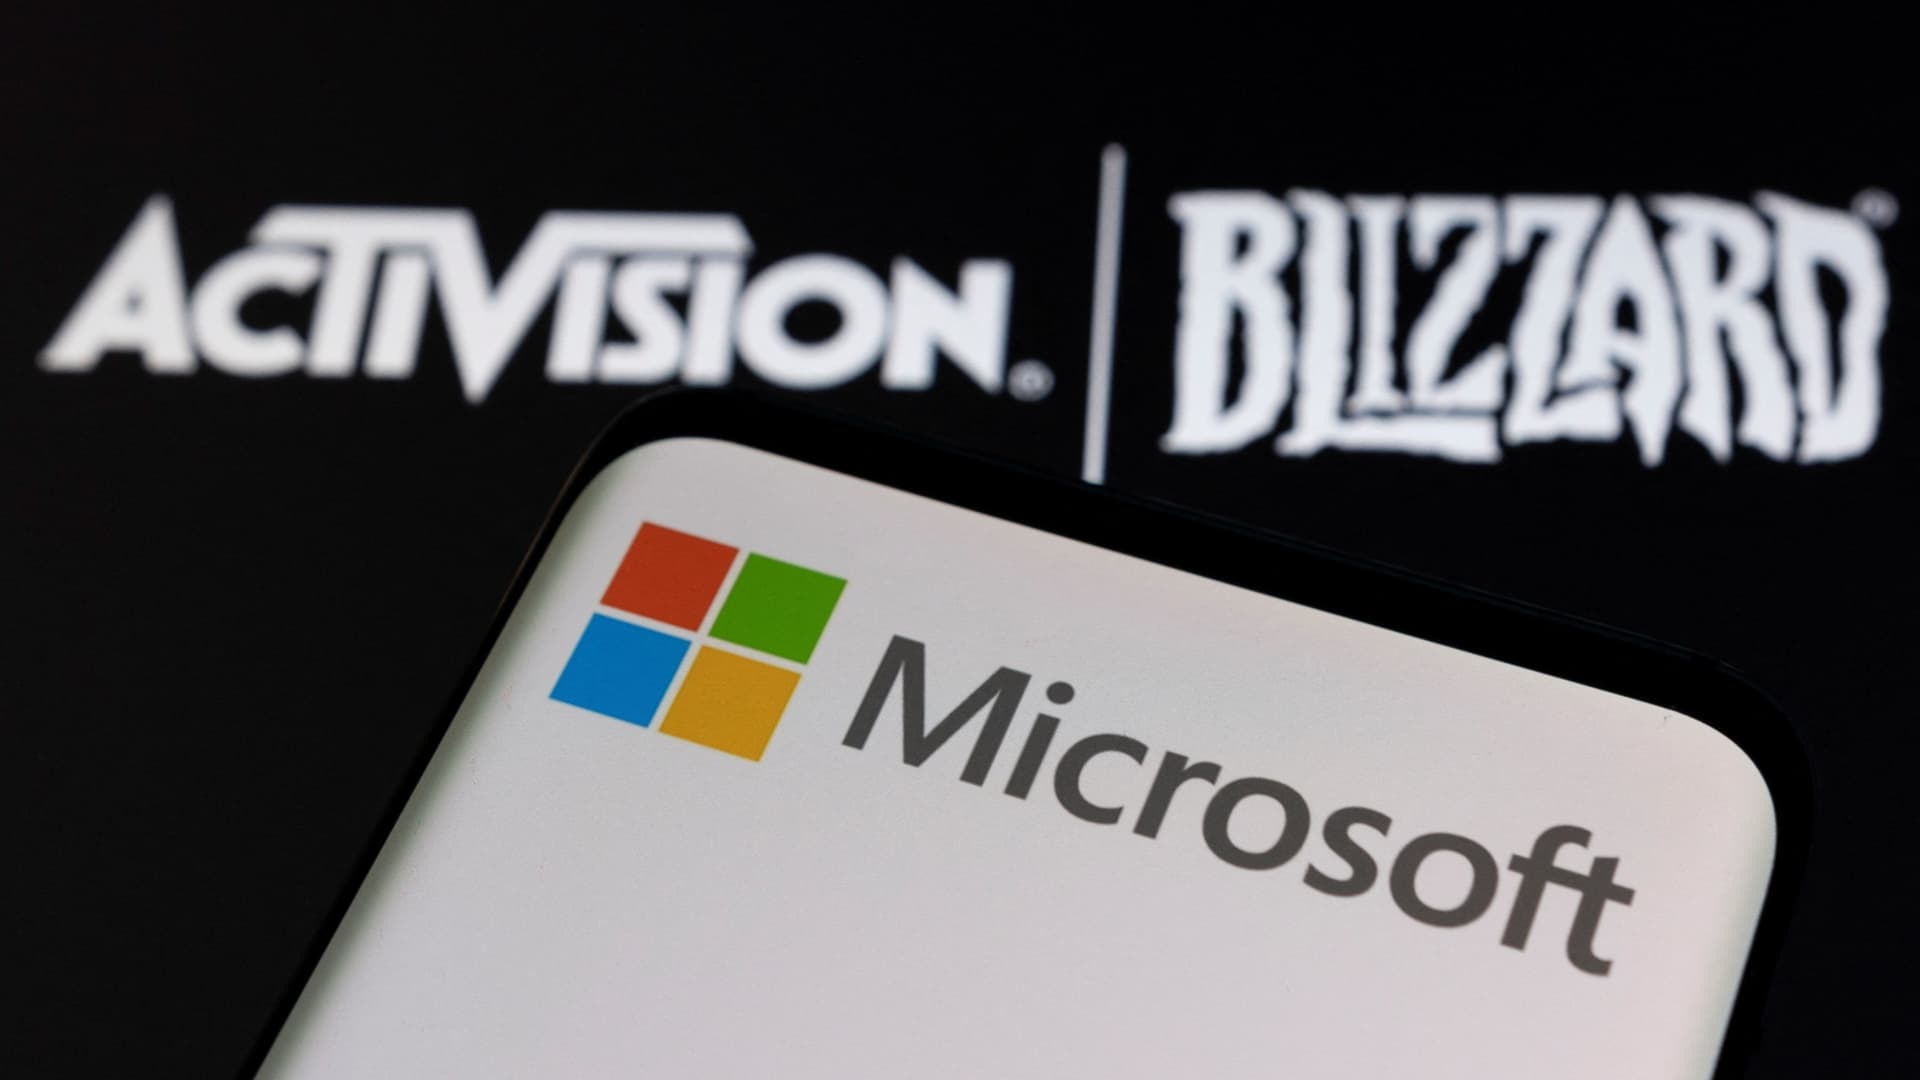 Apple, Manchester United, Activision Blizzard and more